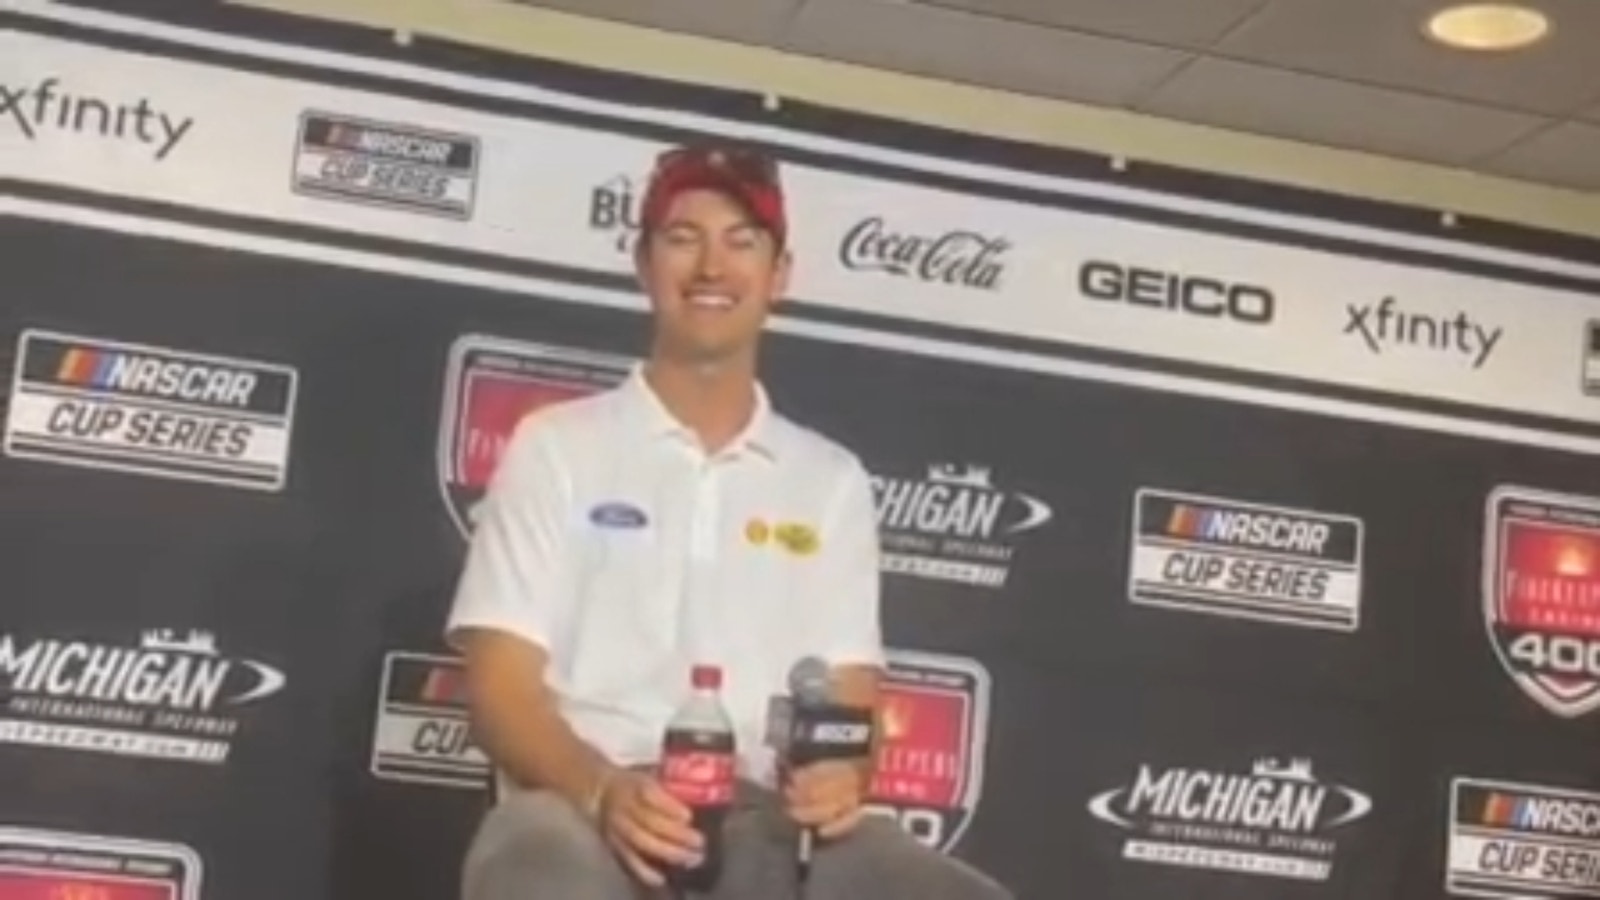 Logano on his Indianapolis Motor Speedway experience